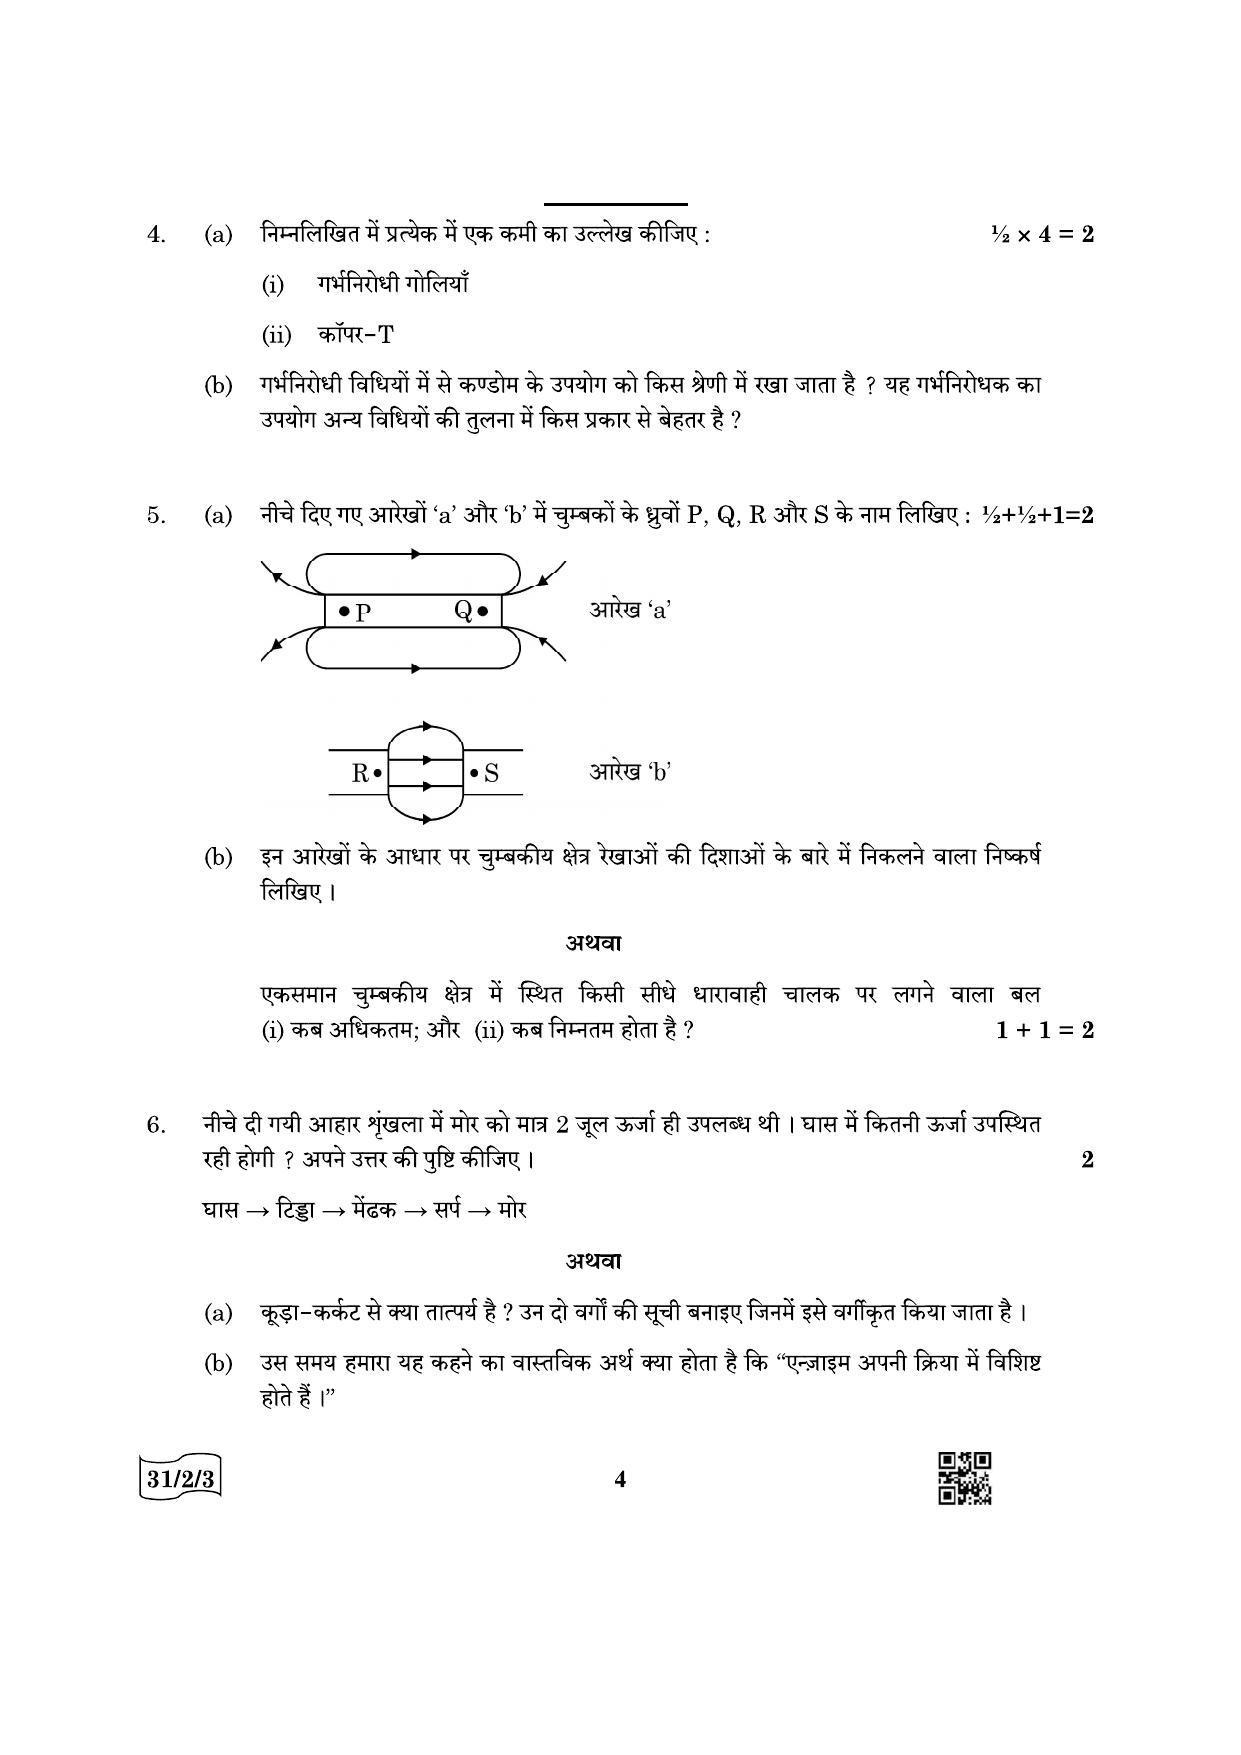 CBSE Class 10 31-2-3 Science 2022 Question Paper - Page 4